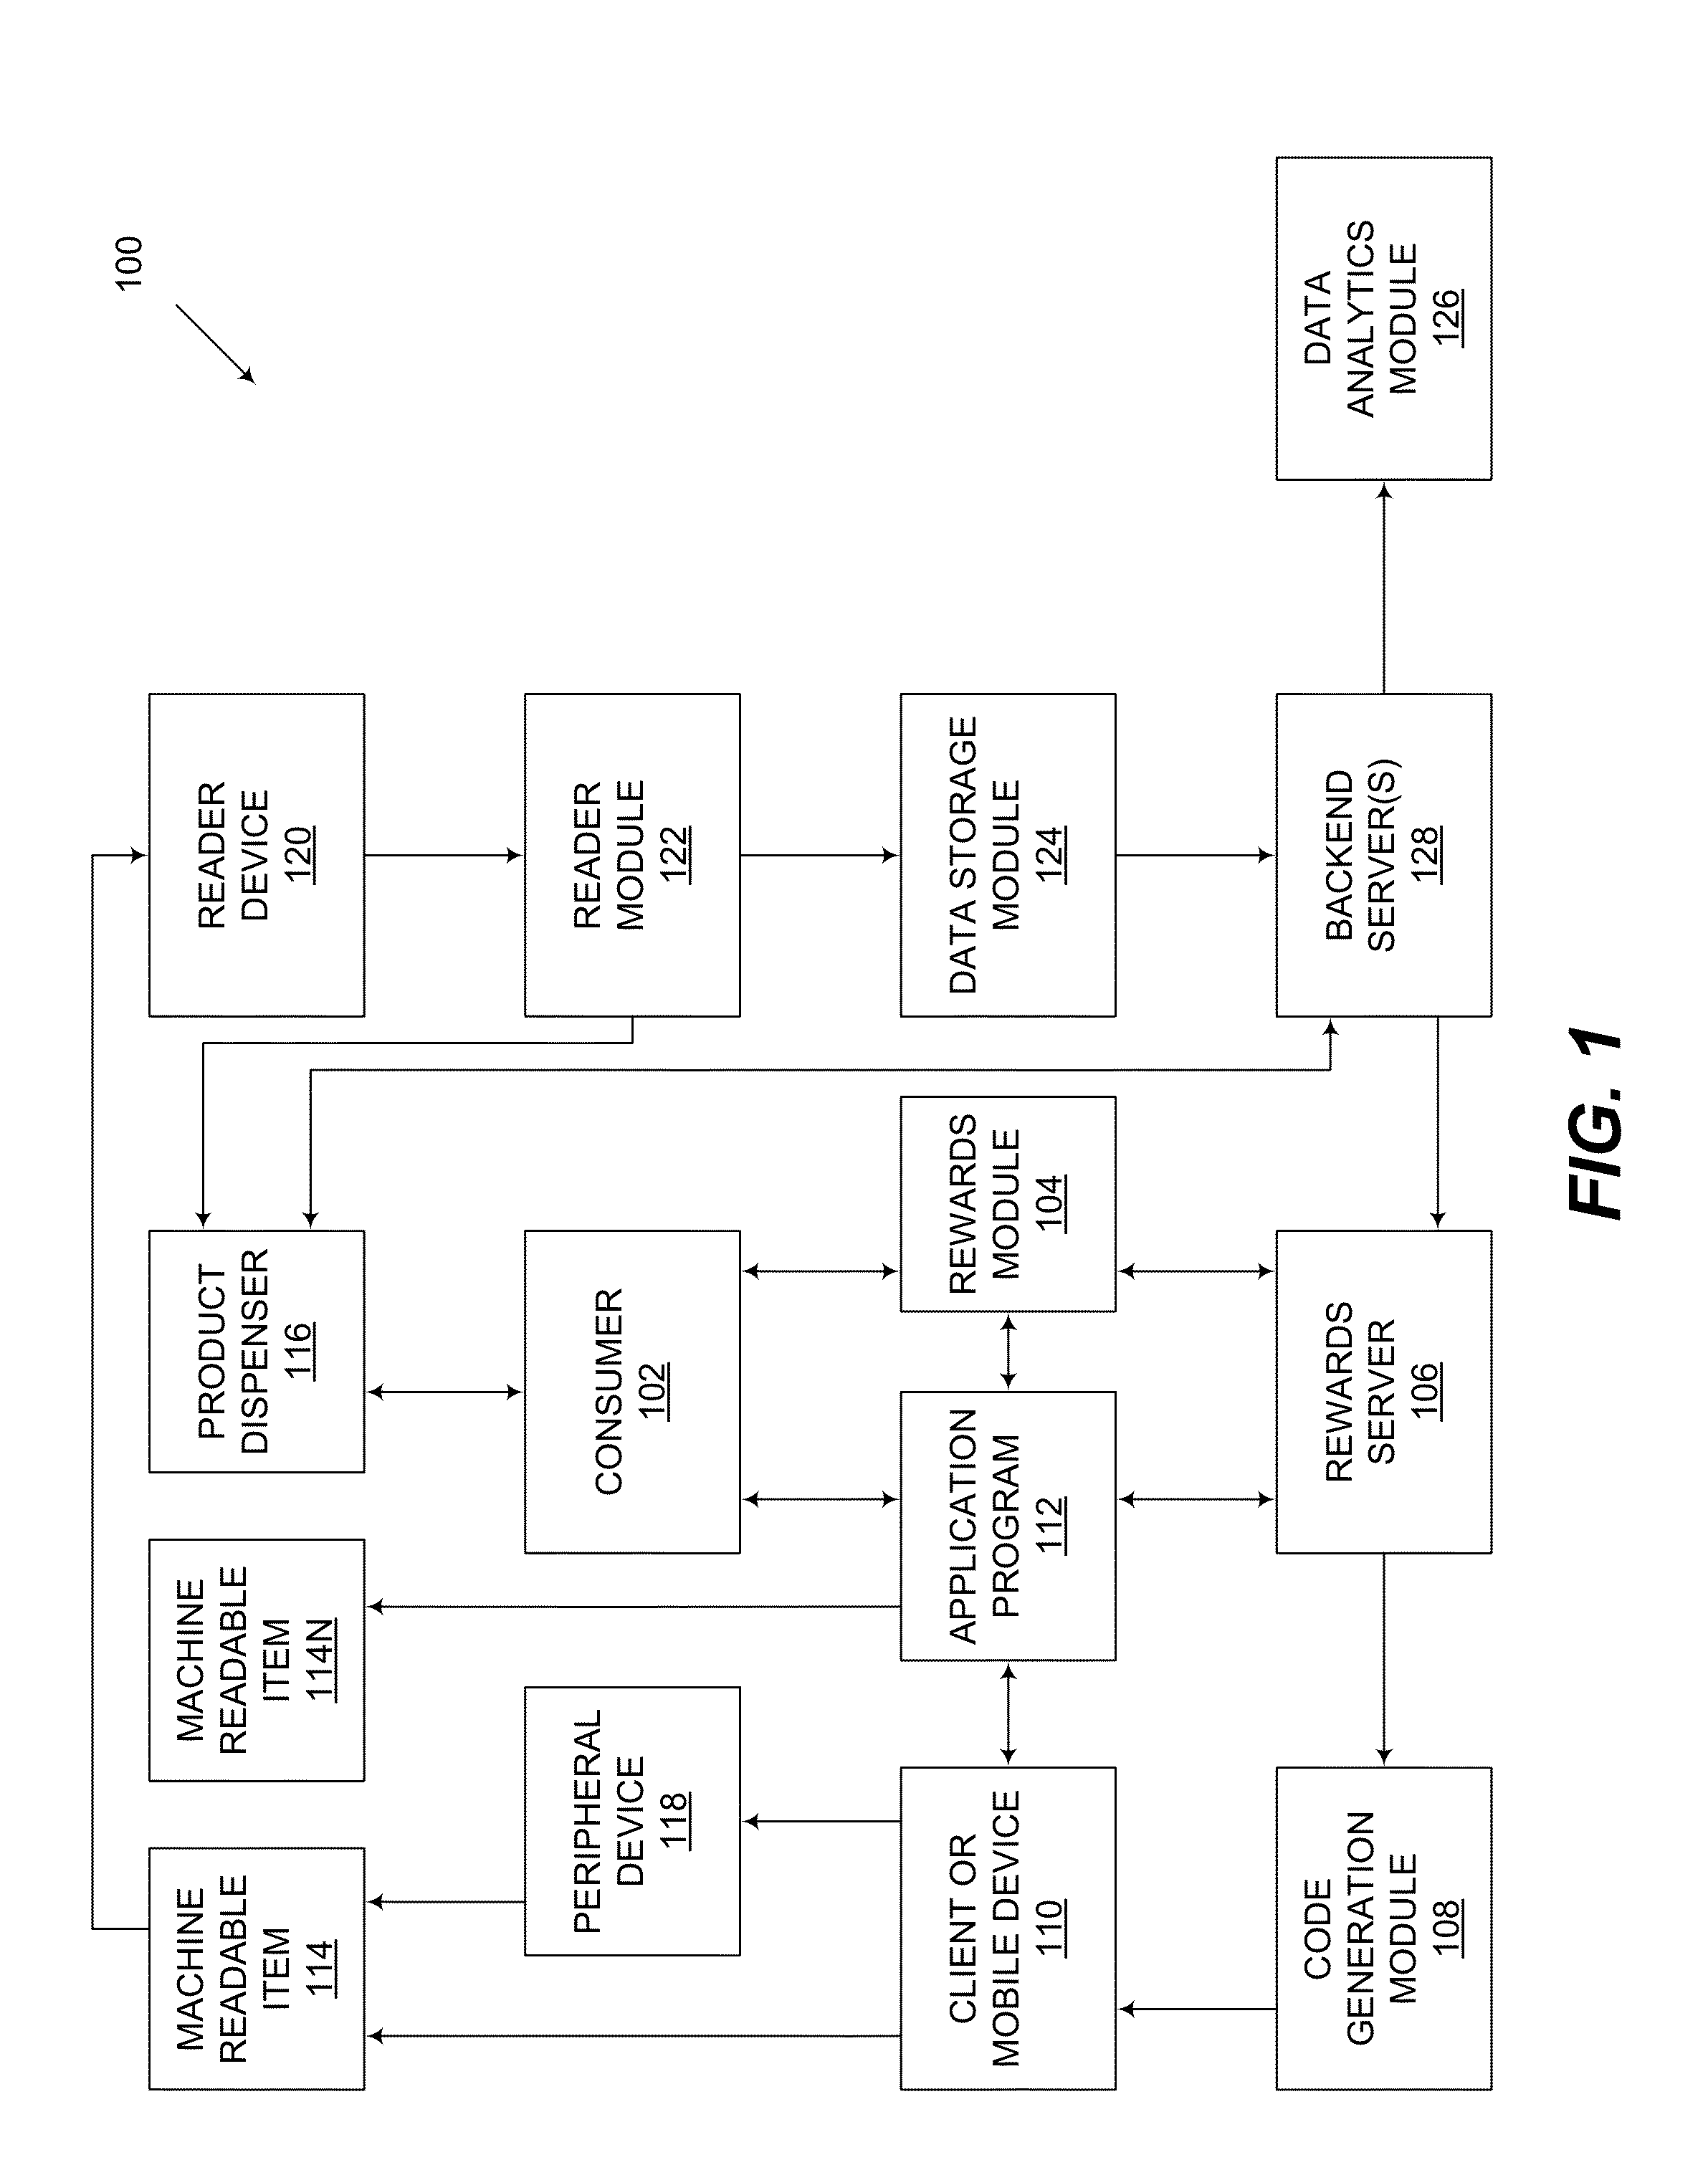 Systems and Methods for Providing a Promotion for a Combined Product Dispensed from a Product Dispenser